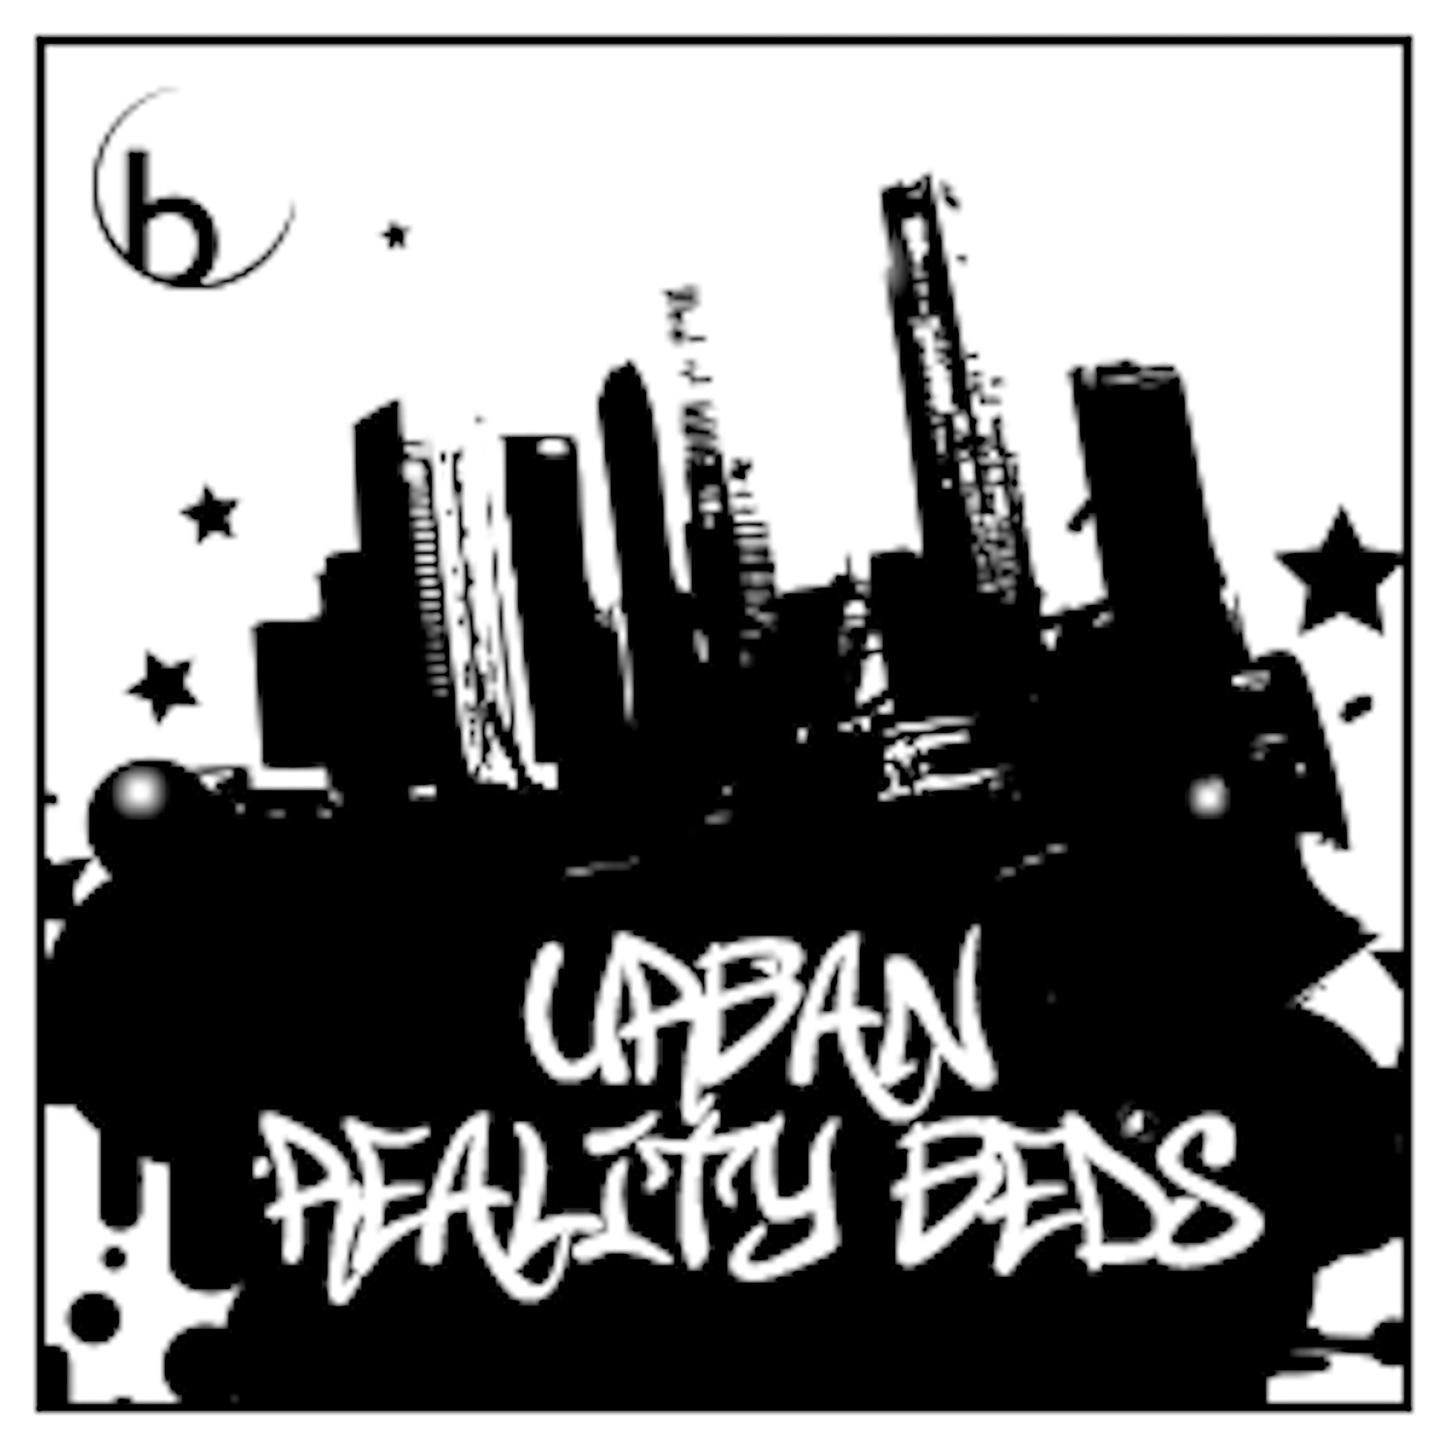 Urban Reality Beds